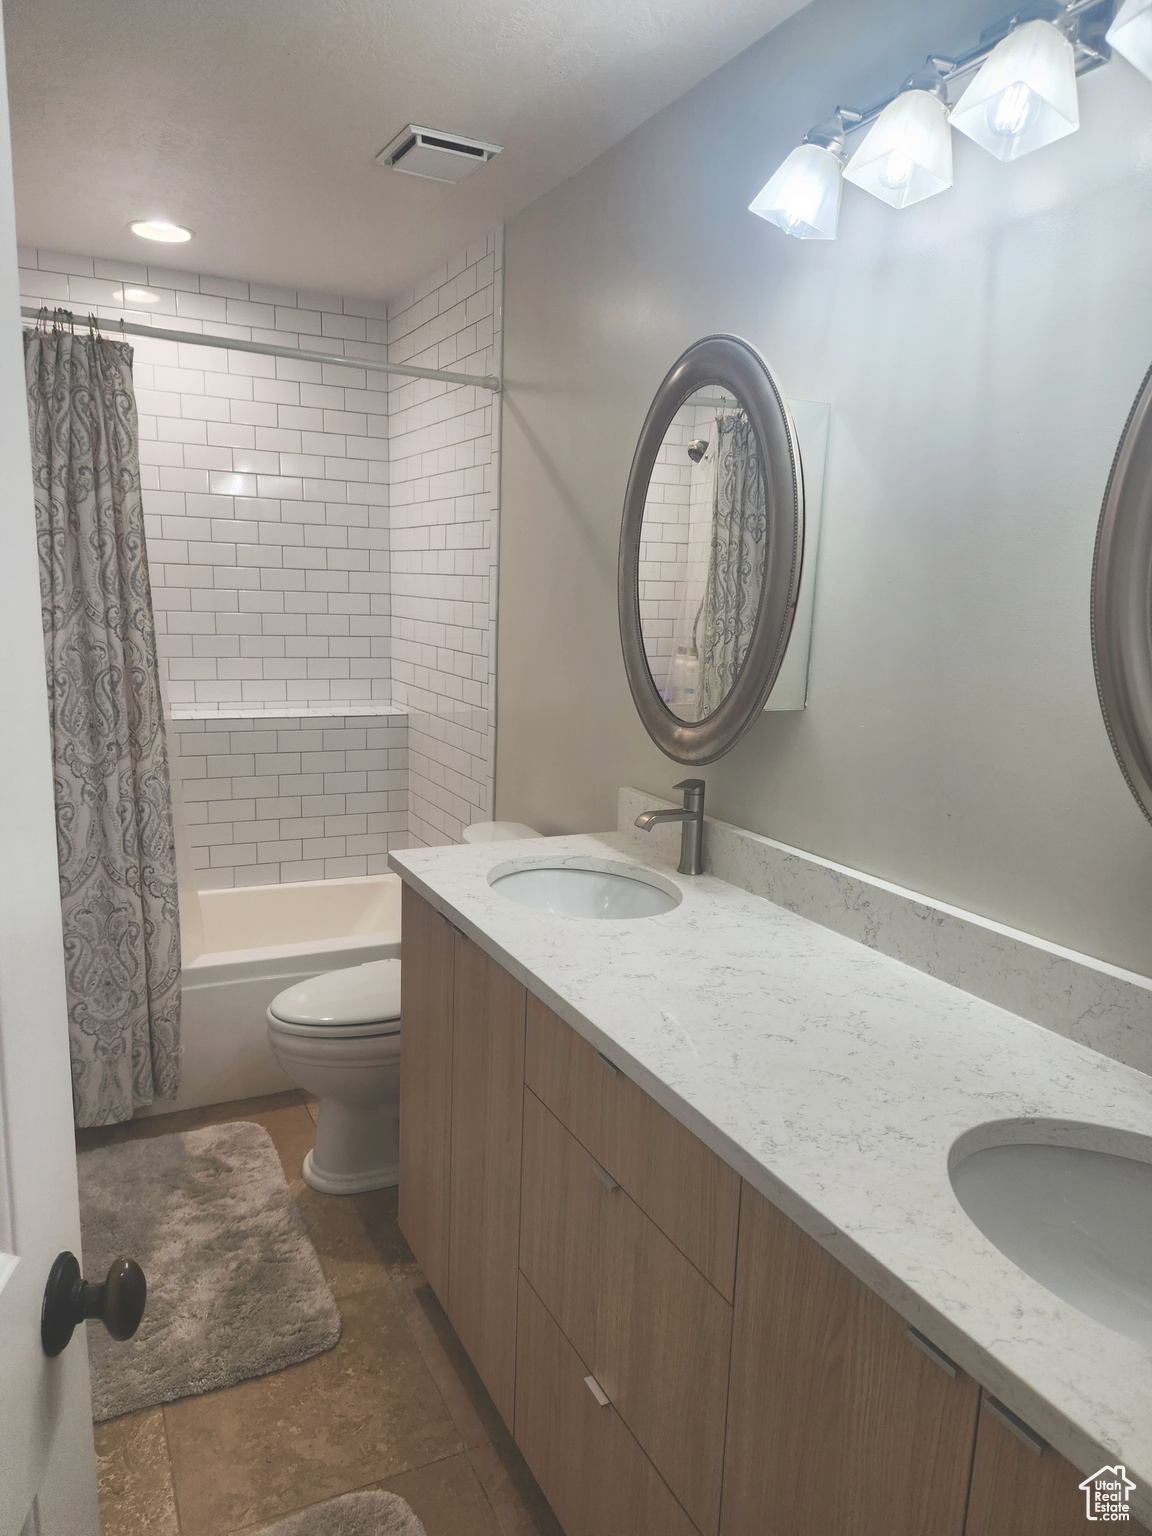 Full bathroom featuring tile floors, toilet, double vanity, and shower / bathtub combination with curtain